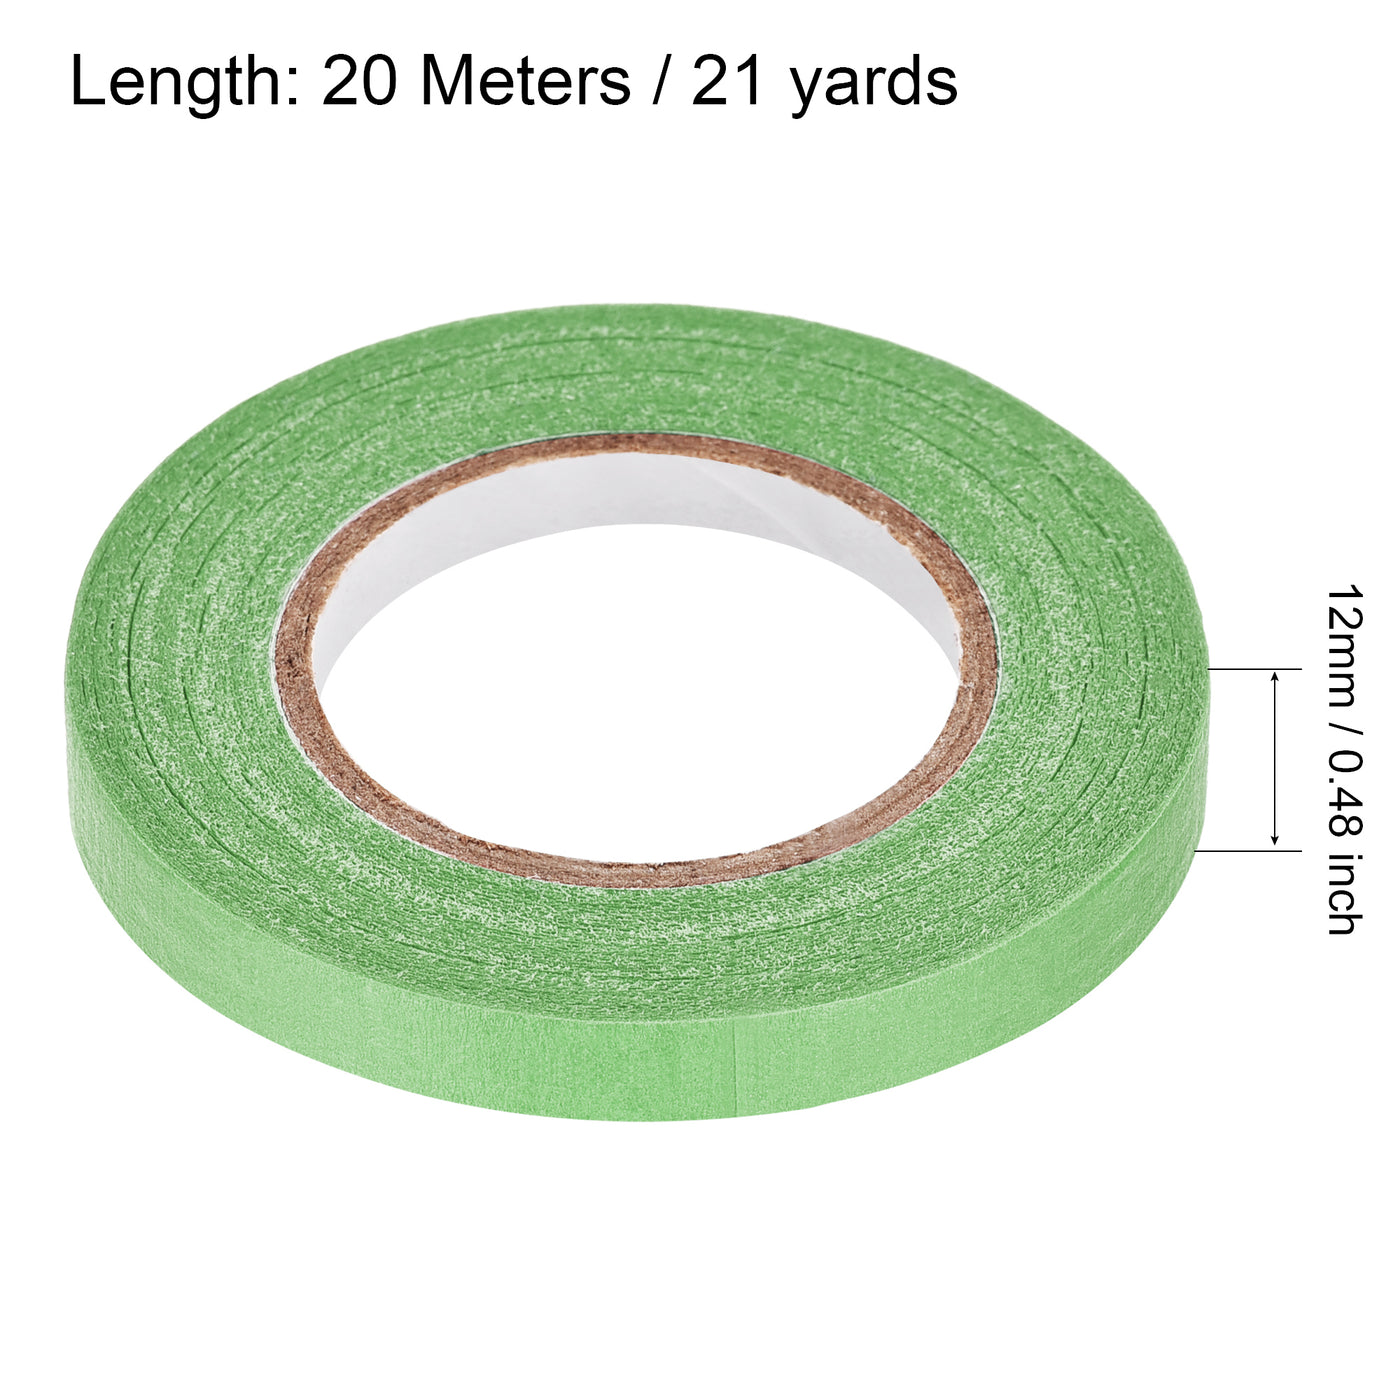 uxcell Uxcell 3Pcs 12mm 0.48 inch Wide 20m 21 Yards Masking Tape Painter Tape Roll Light Green